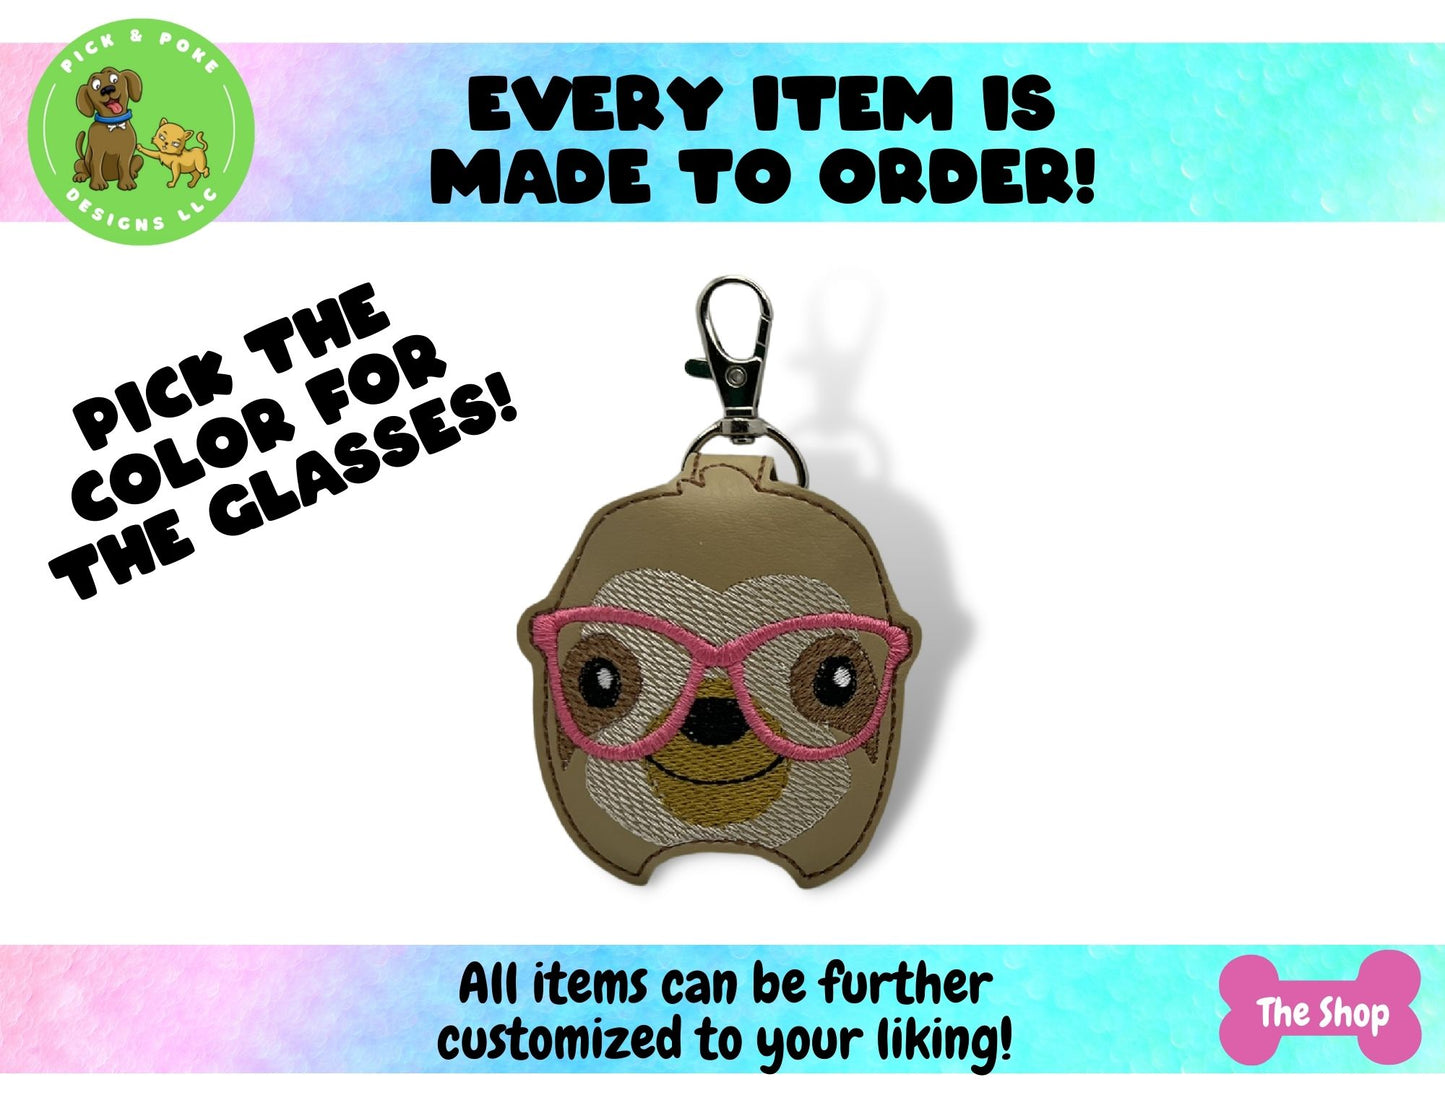 Cute Sloth Wearing Glasses Hand Sanitizer Holder Key Chain | Embroidered on Vinyl | Made to Order